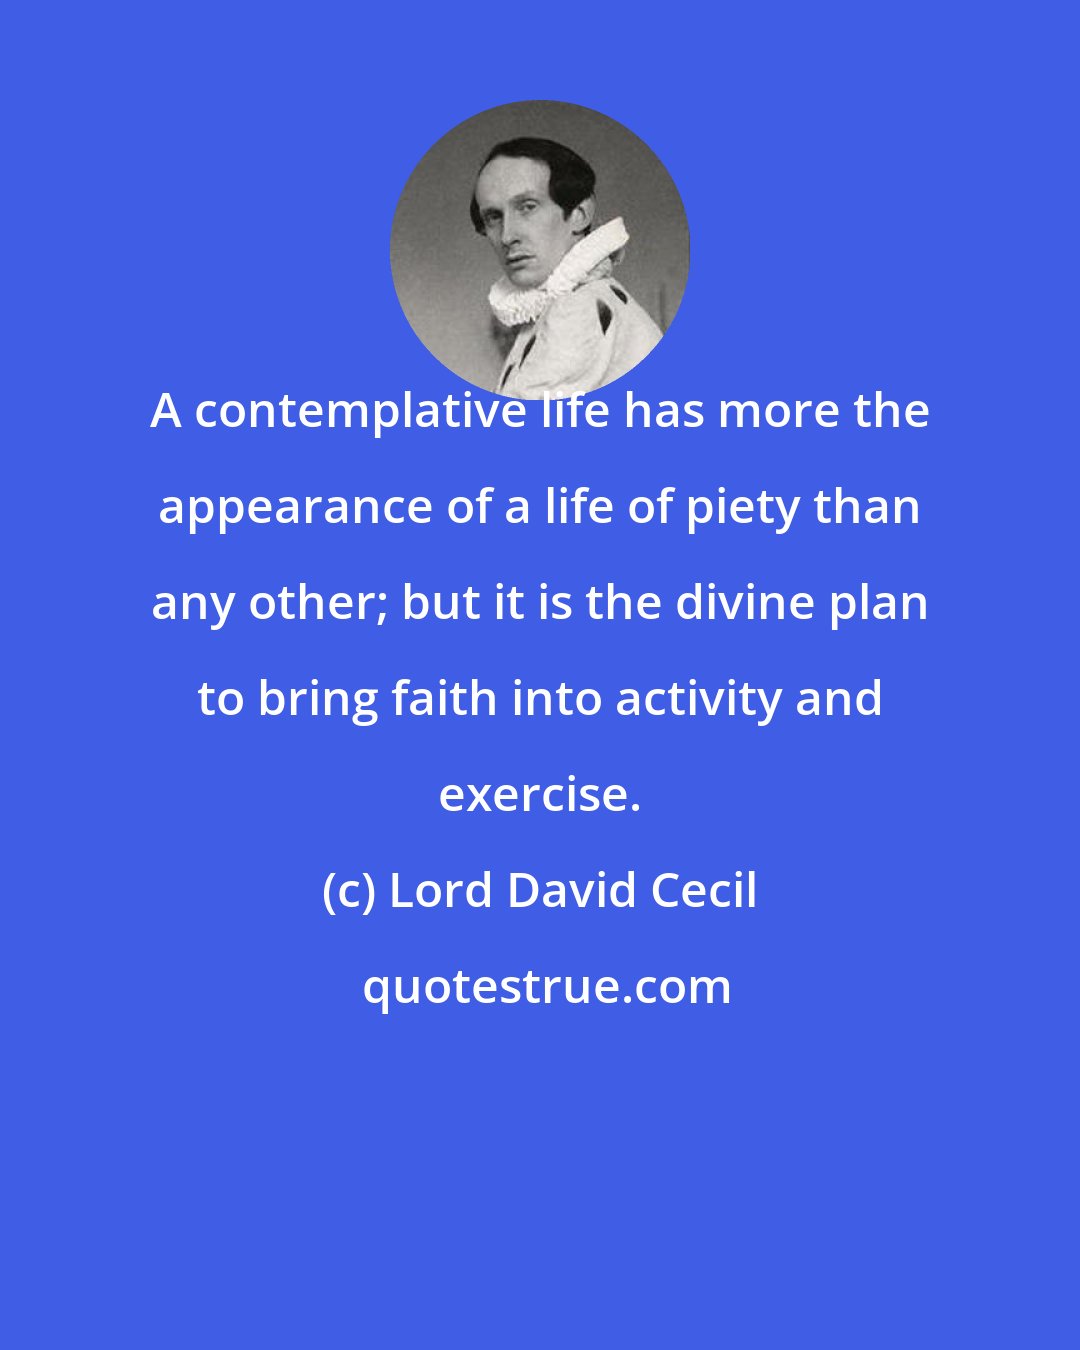 Lord David Cecil: A contemplative life has more the appearance of a life of piety than any other; but it is the divine plan to bring faith into activity and exercise.